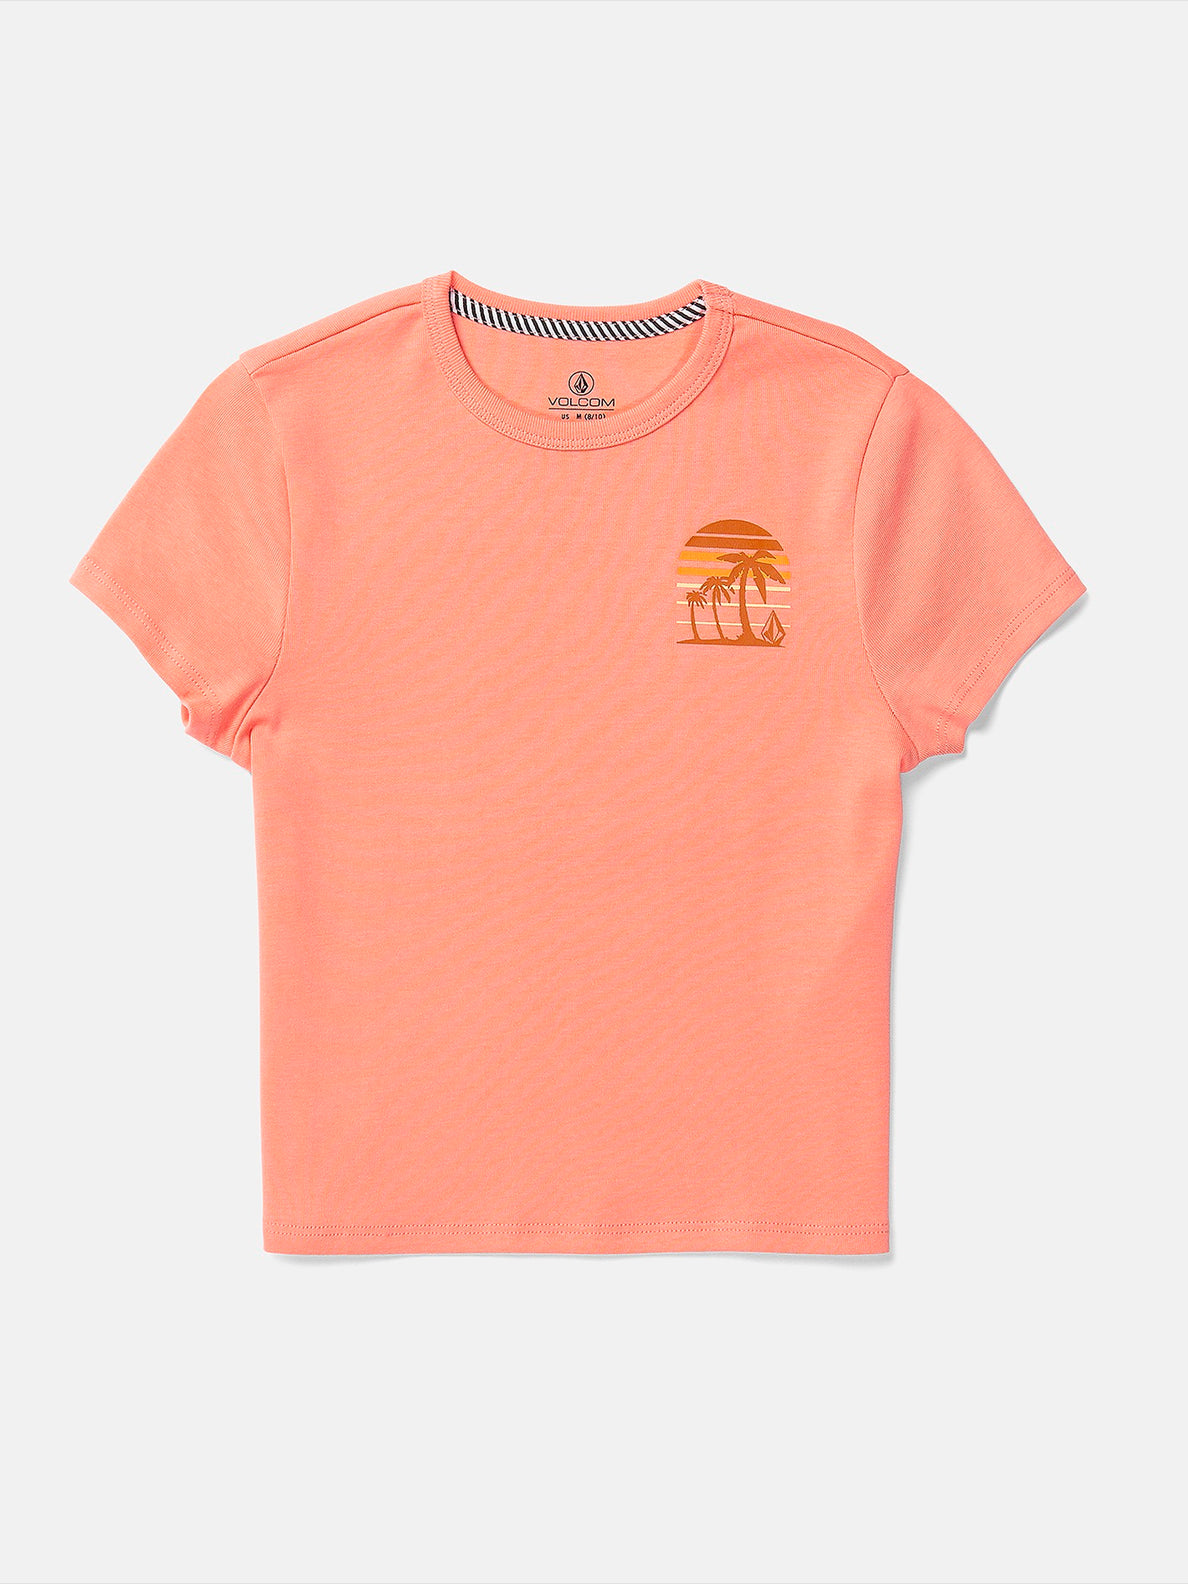 Girls Have A Clue Tee - Reef Pink